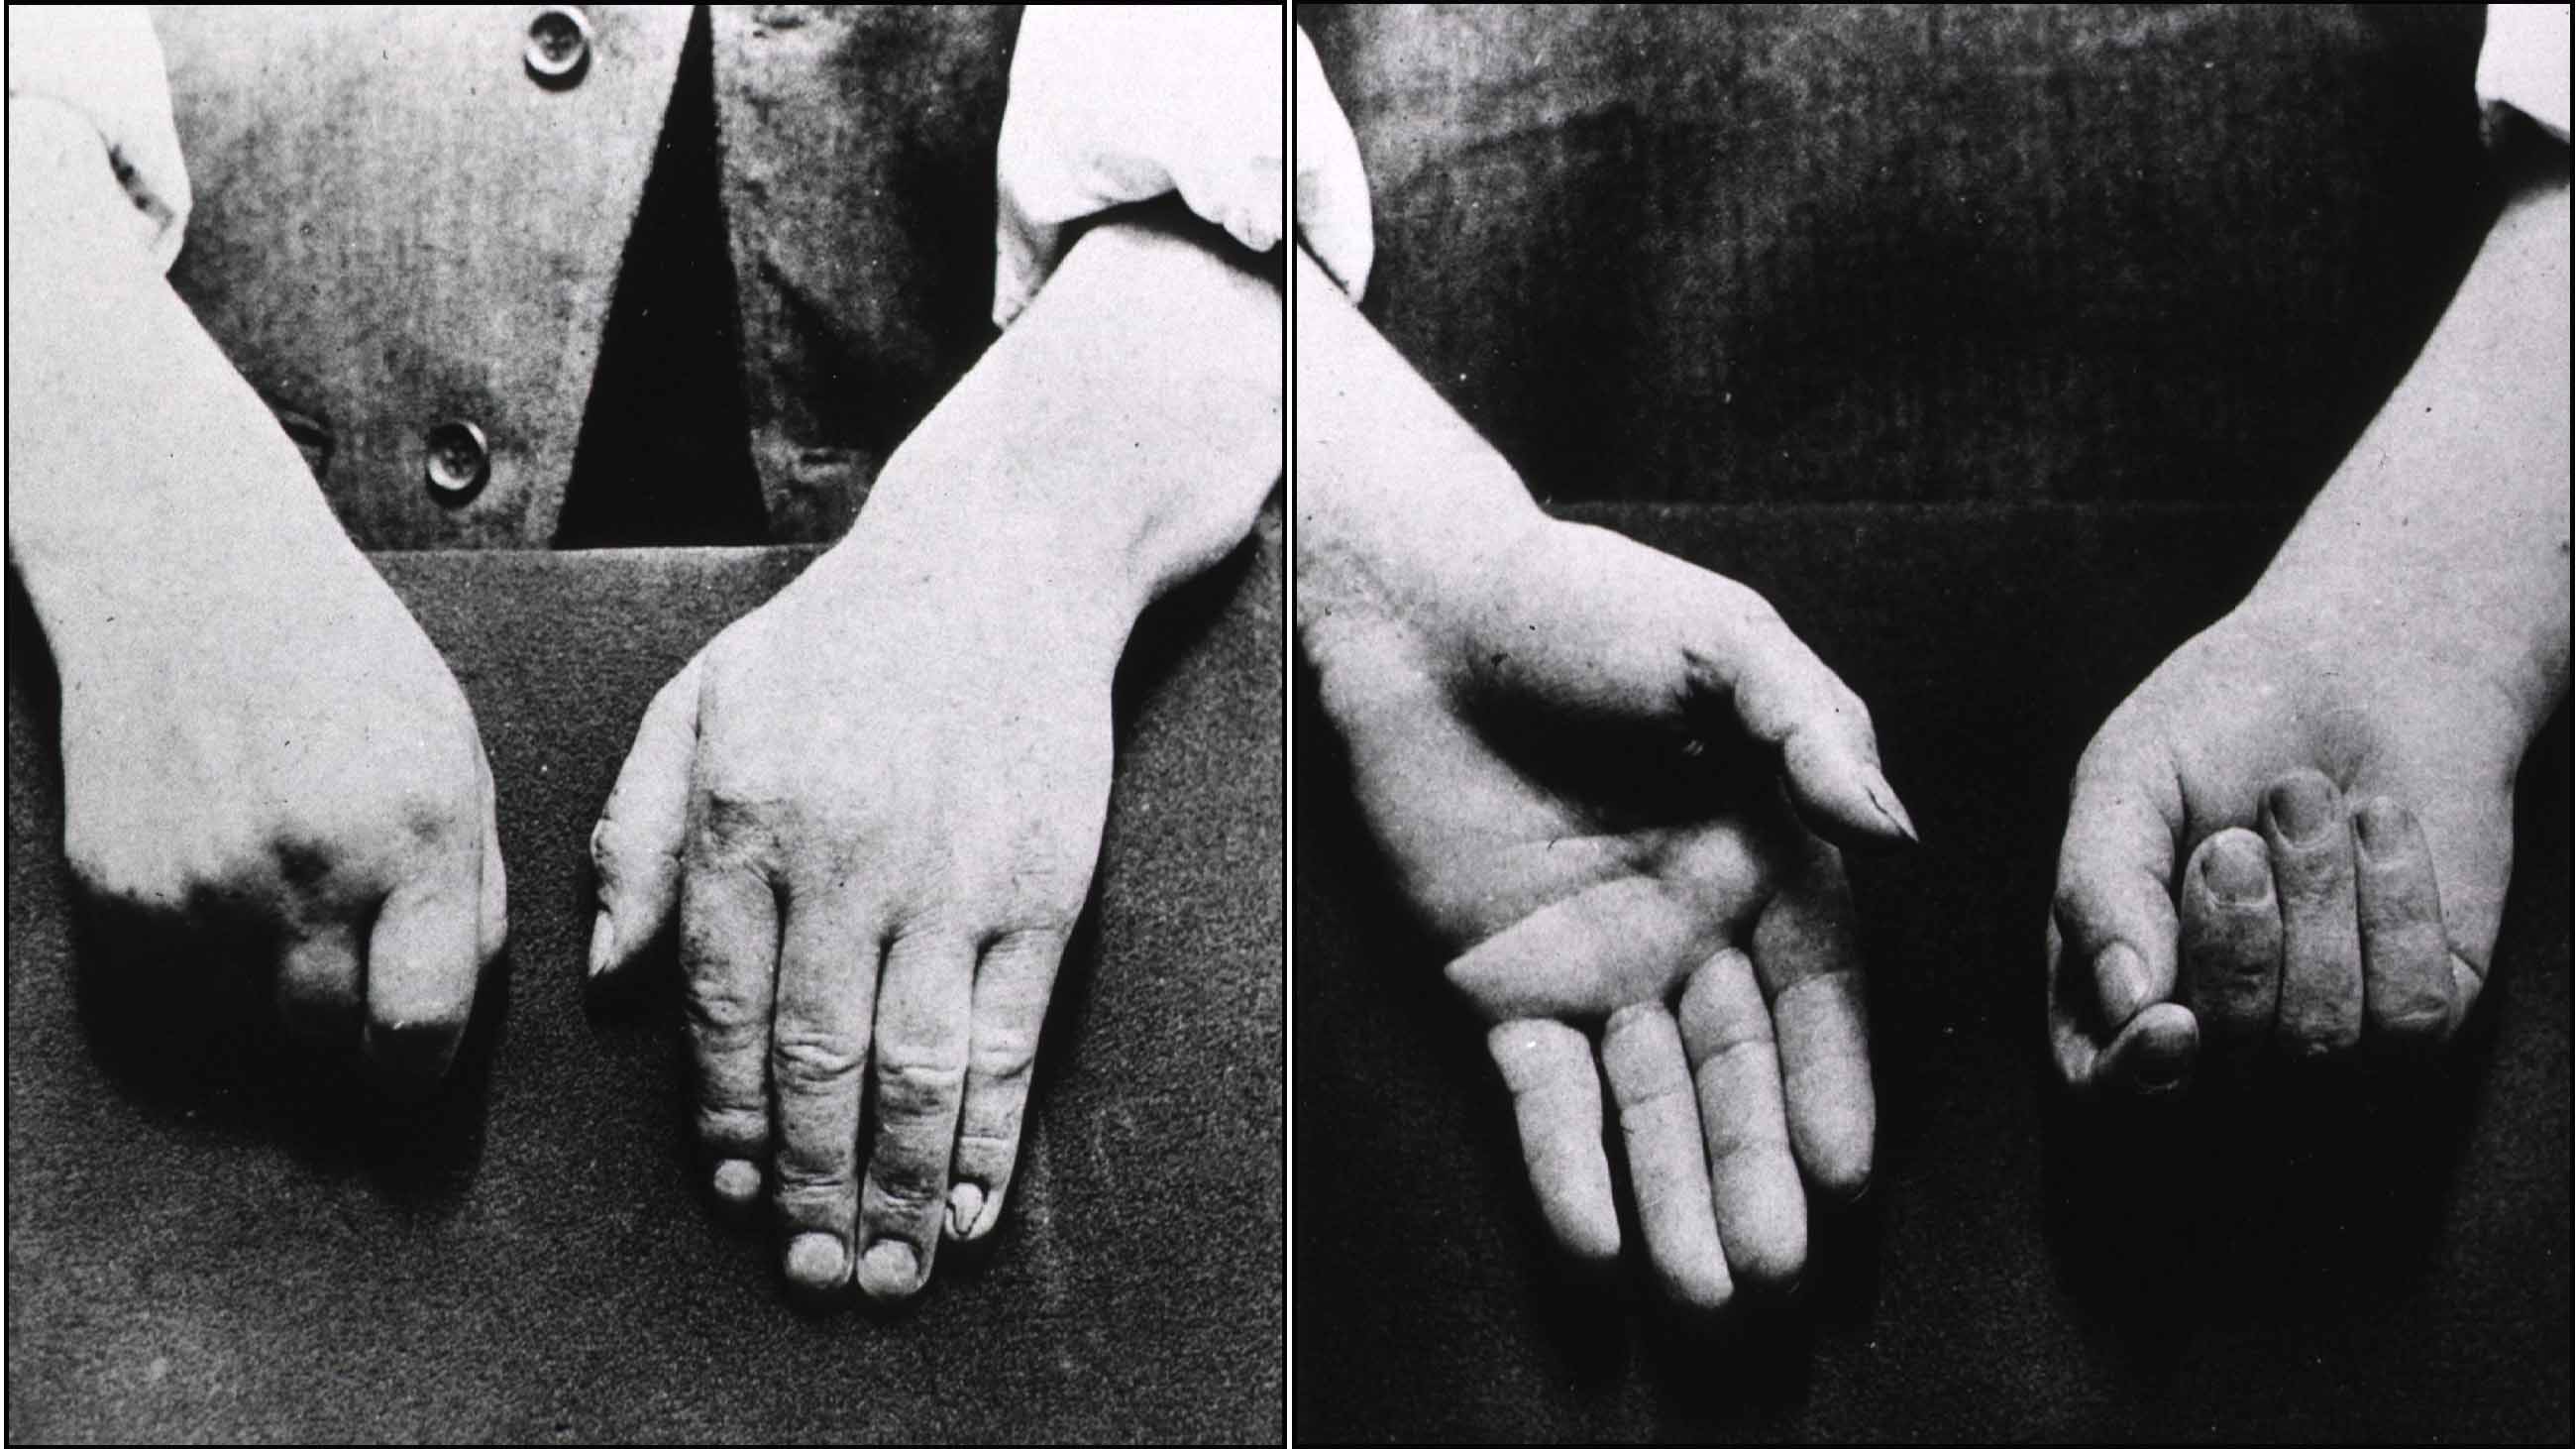 1892 photos showing effects of Parkinson's disease, from the front and behind the patient's back.